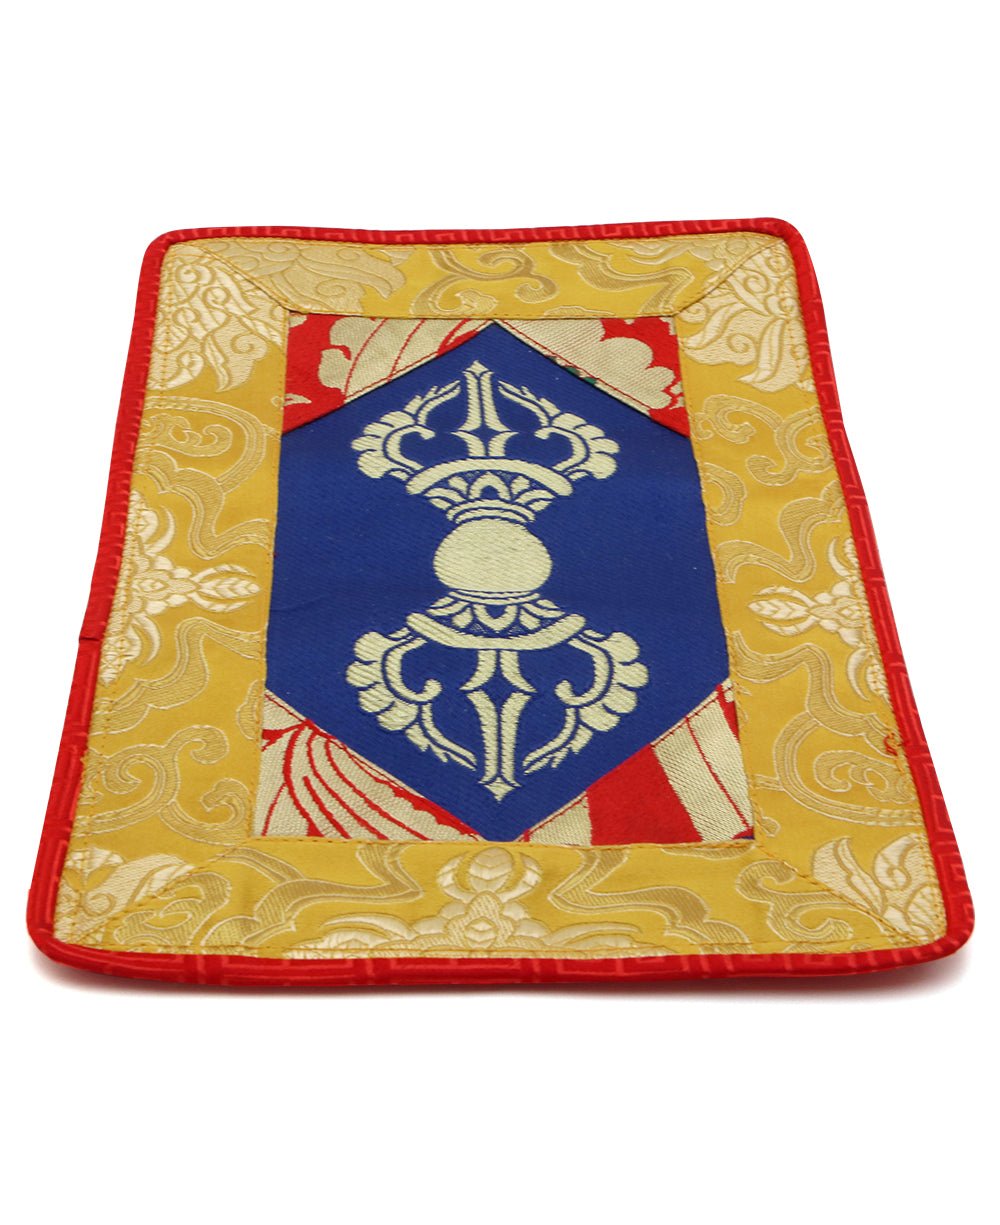 Brocade Dorje Altar Mat in Yellow, Blue and Red - Home & Garden